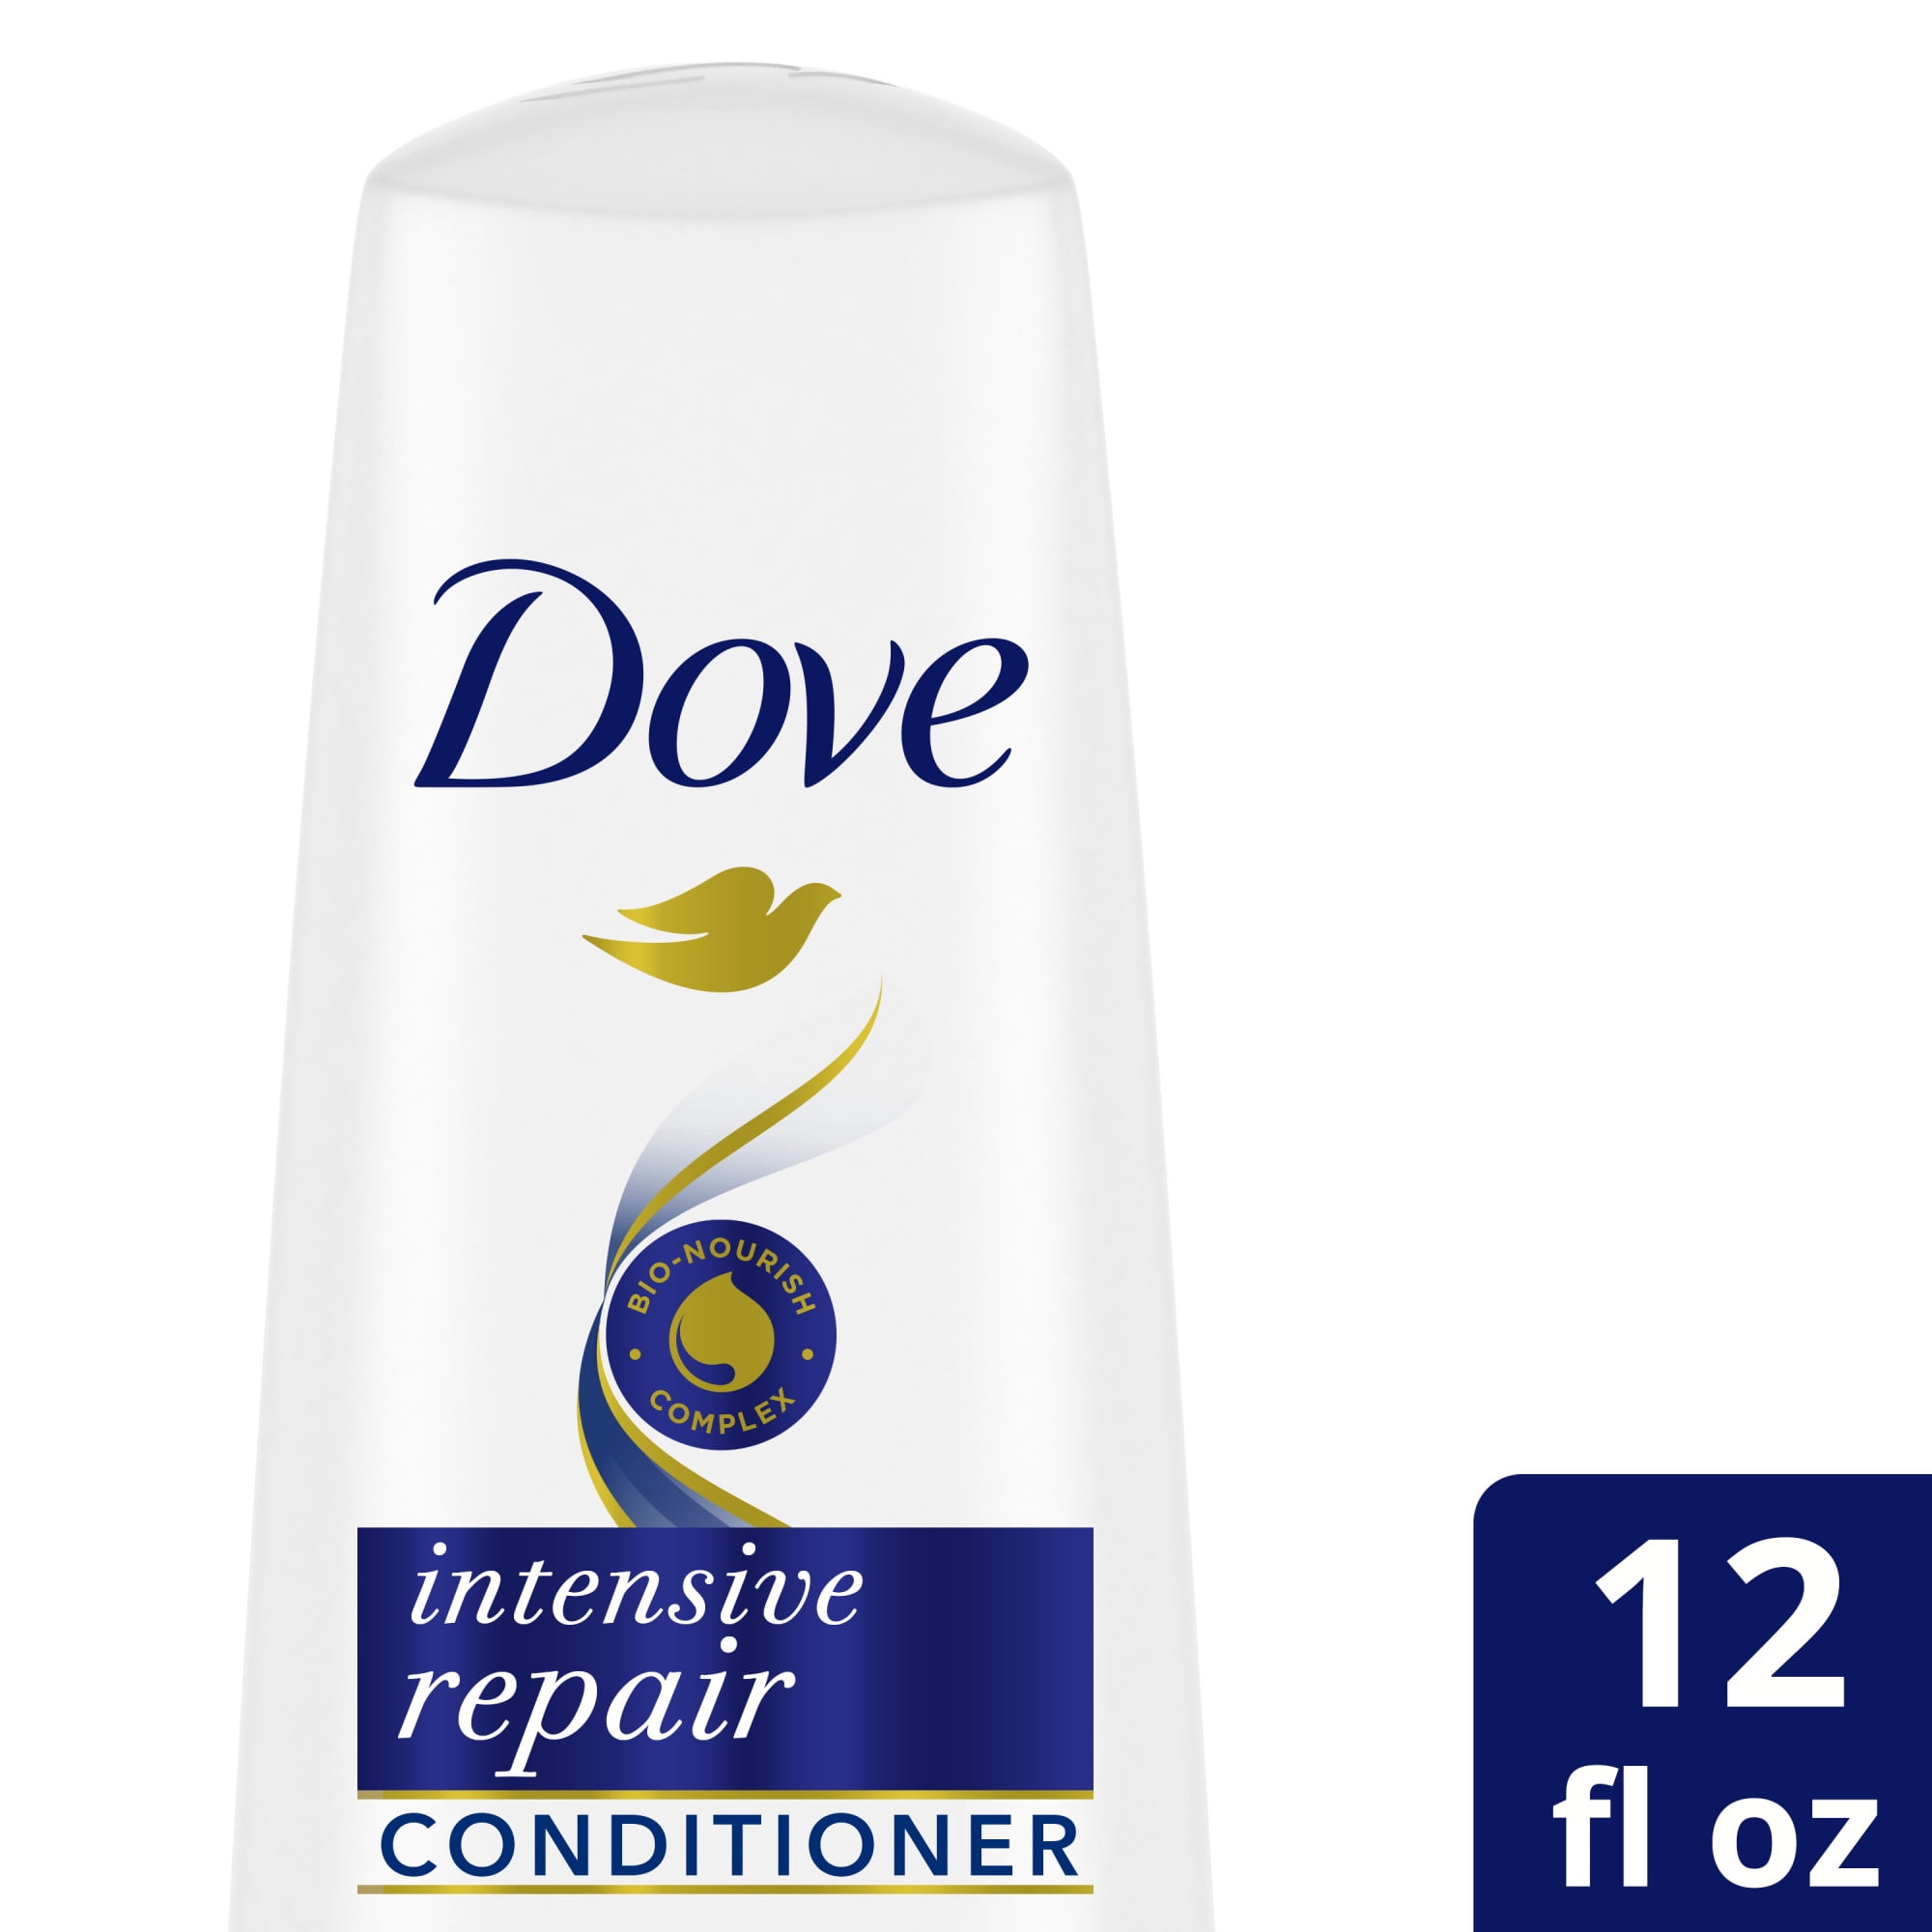 Dove Intensive Repair Conditioner for Damaged Hair 12 fl oz